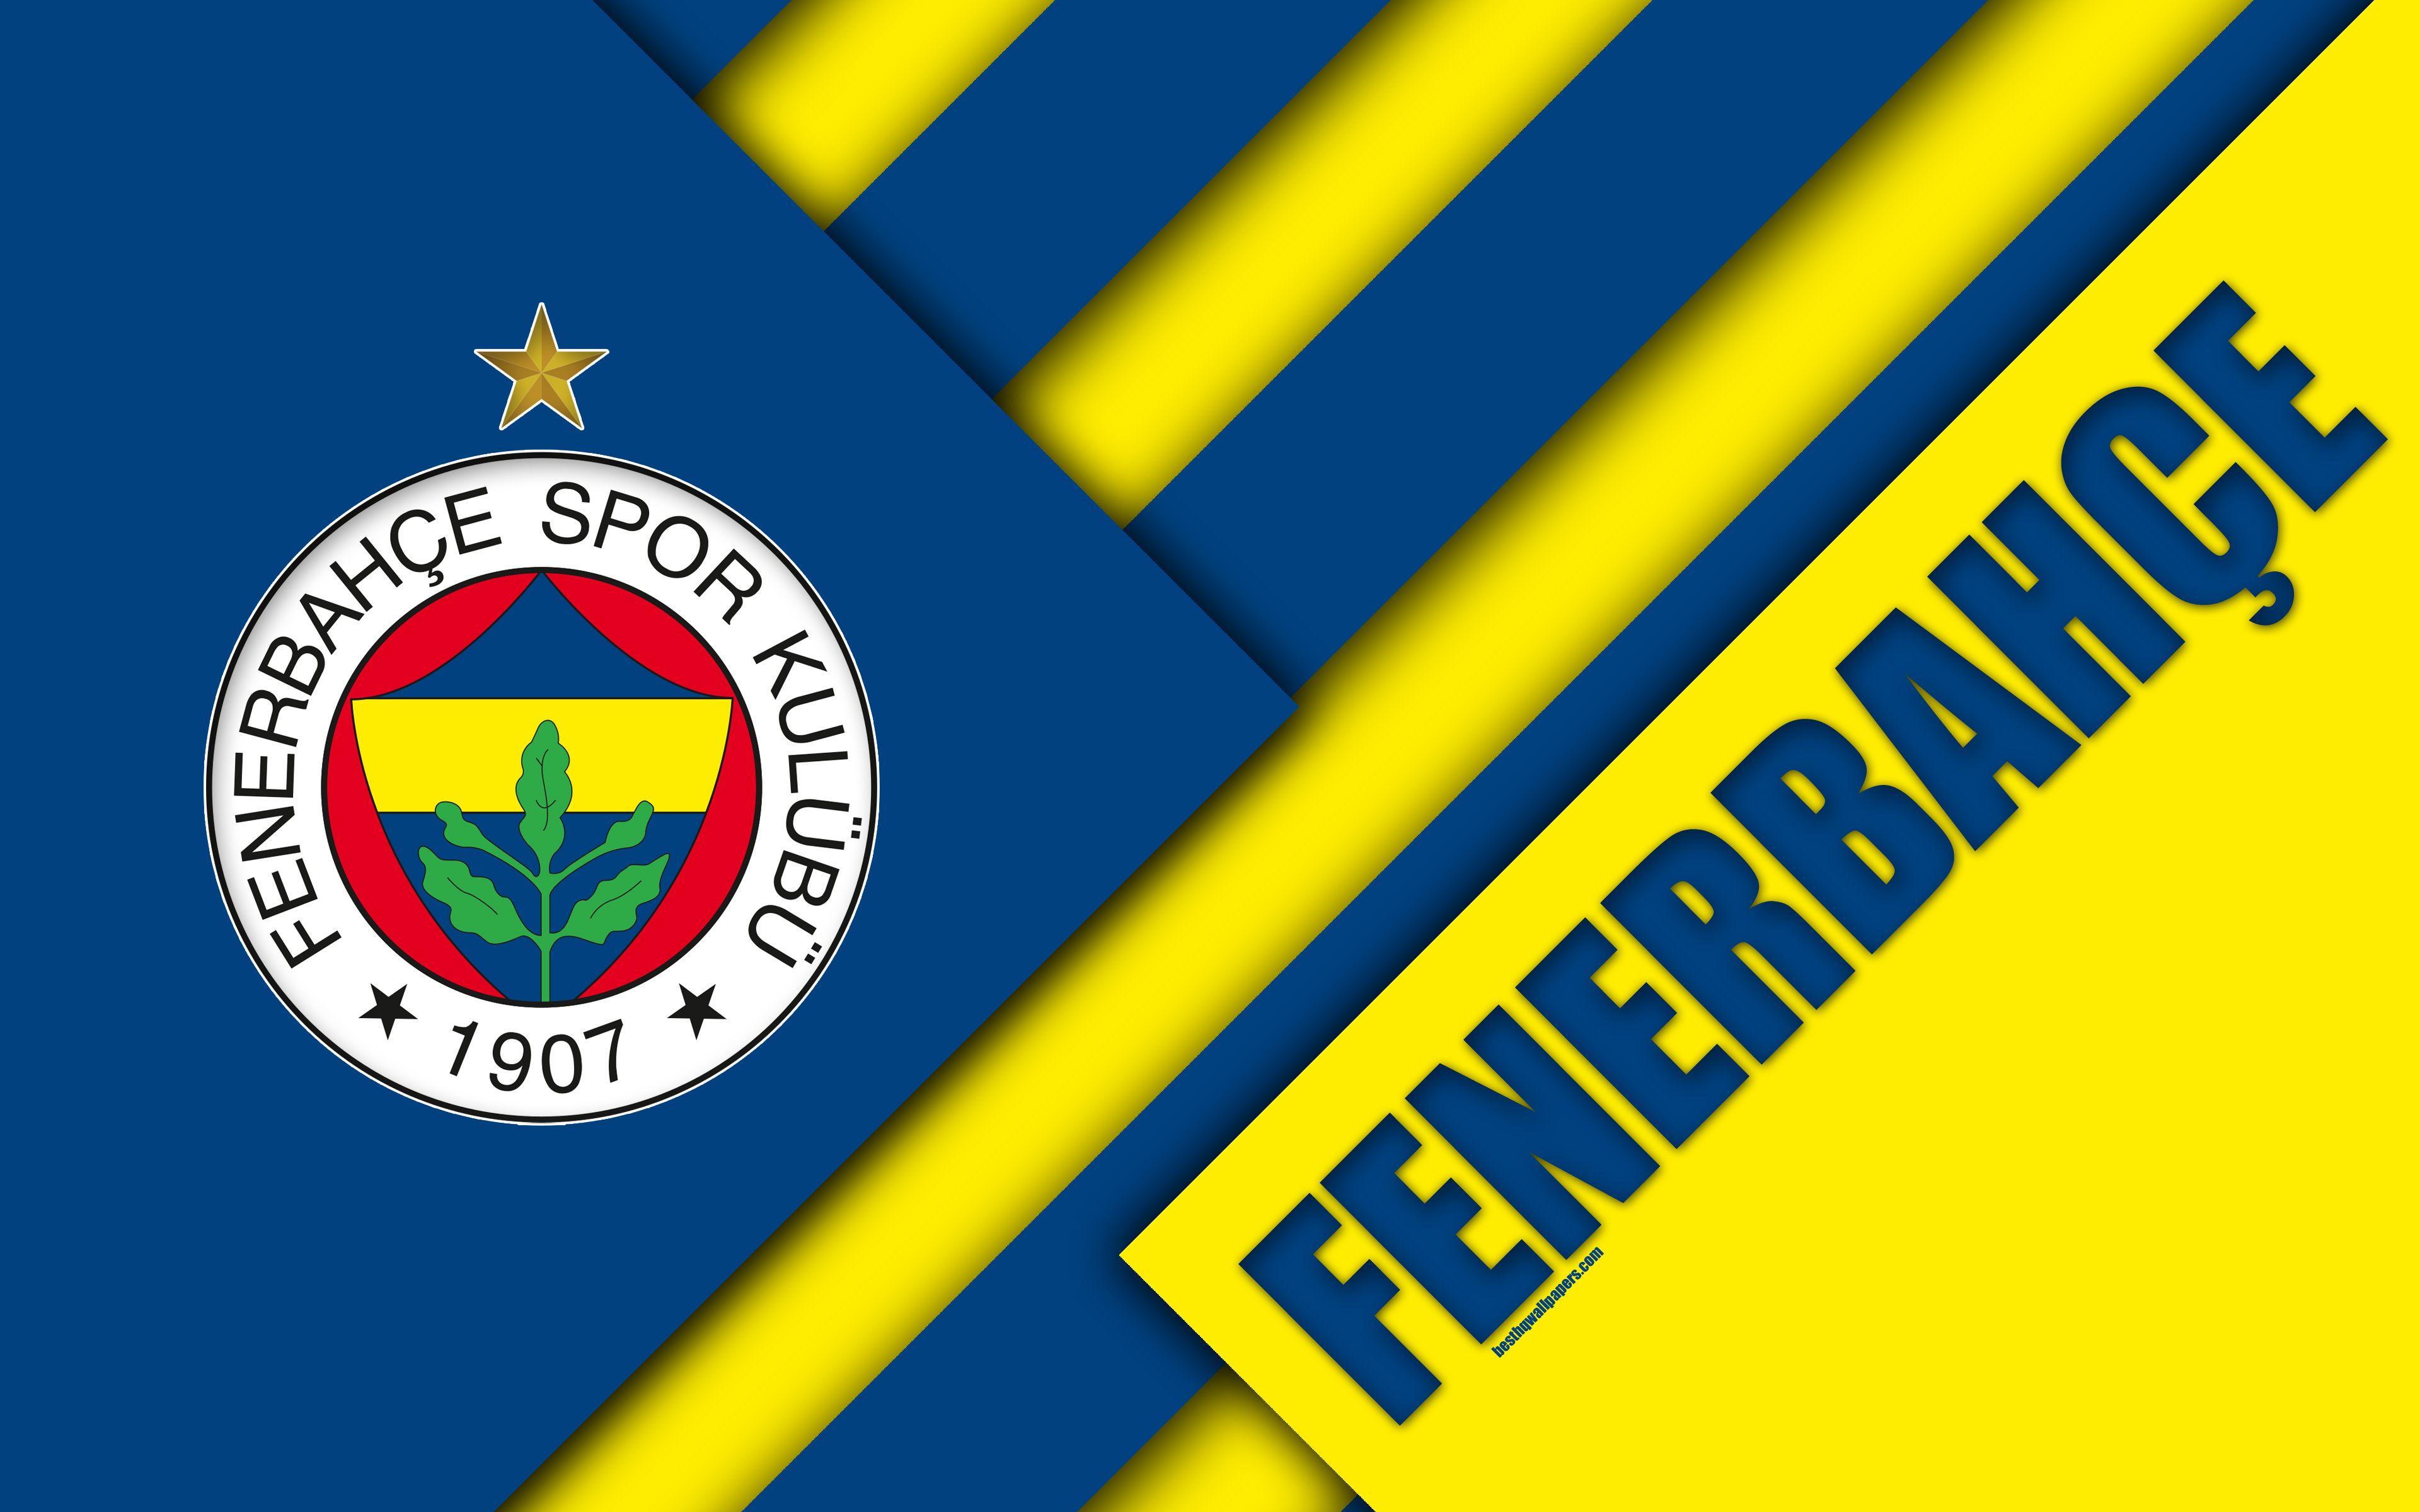 Download wallpaper Fenerbahce SK, emblem, 4k, material design, logo, blue yellow abstraction, Turkish football club, Turkish Superleague, Istanbul, Turkey, Süper Lig for desktop with resolution 3840x2400. High Quality HD picture wallpaper